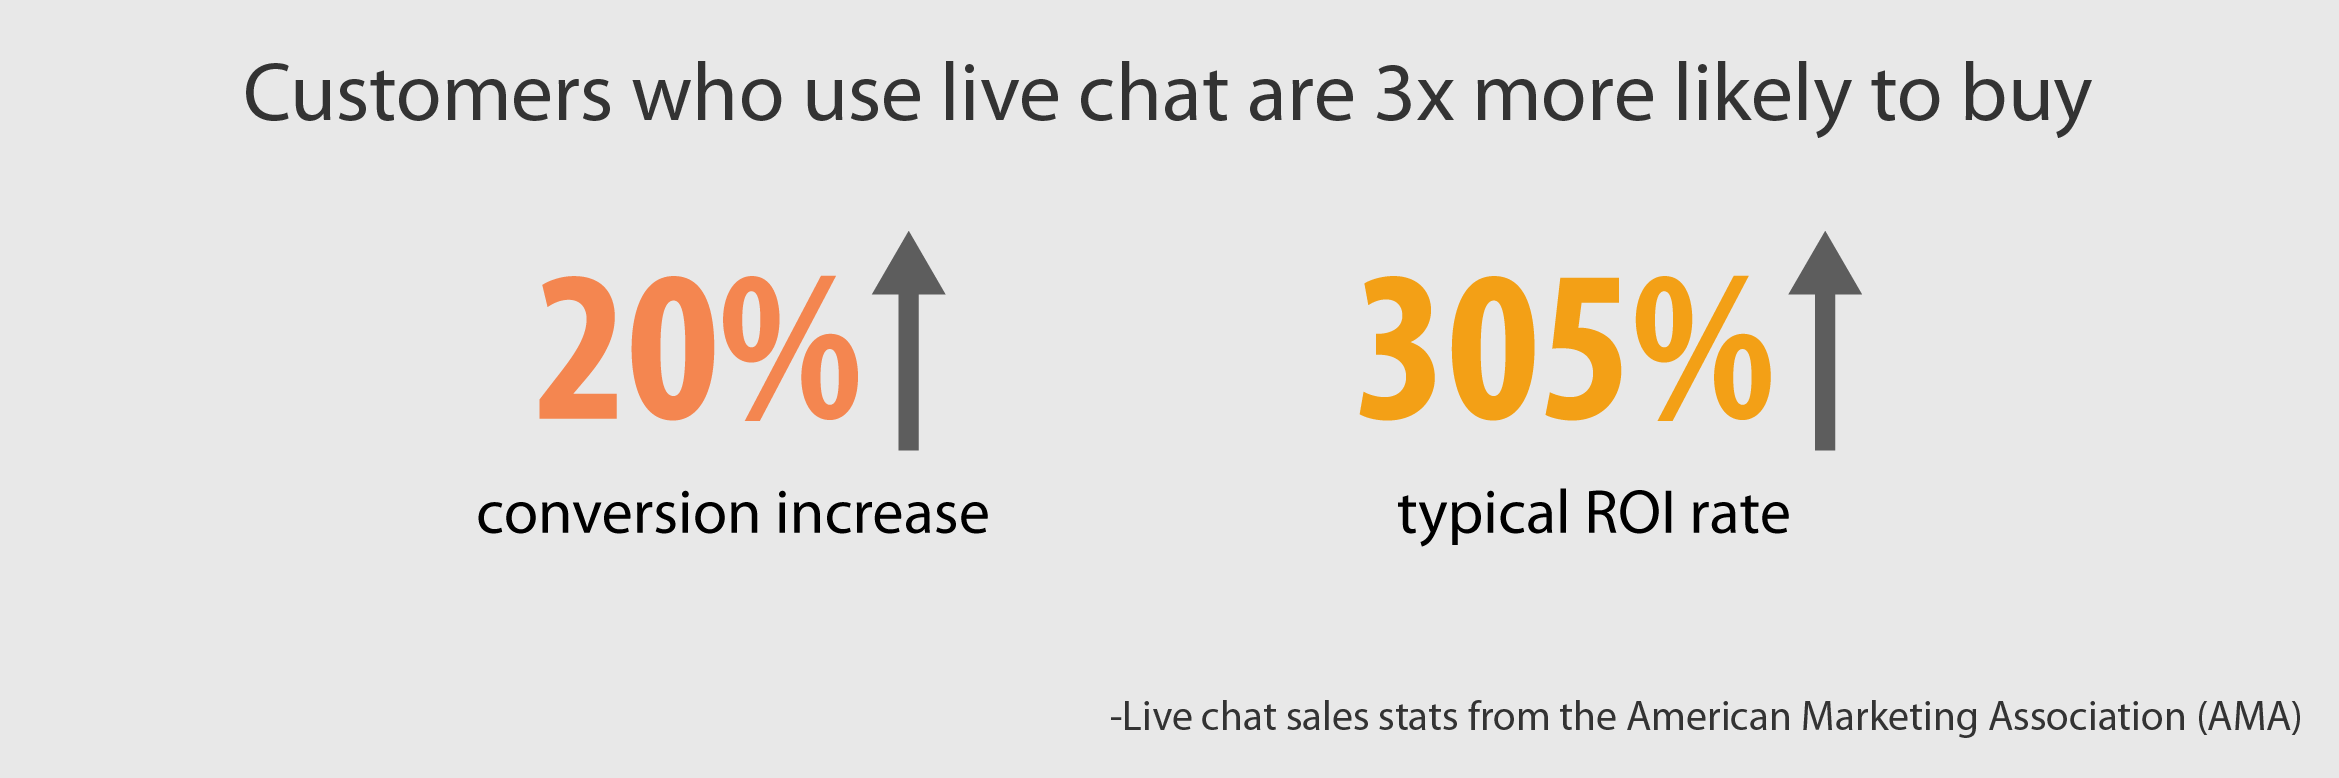 Live chat stats from the American Marketing Association